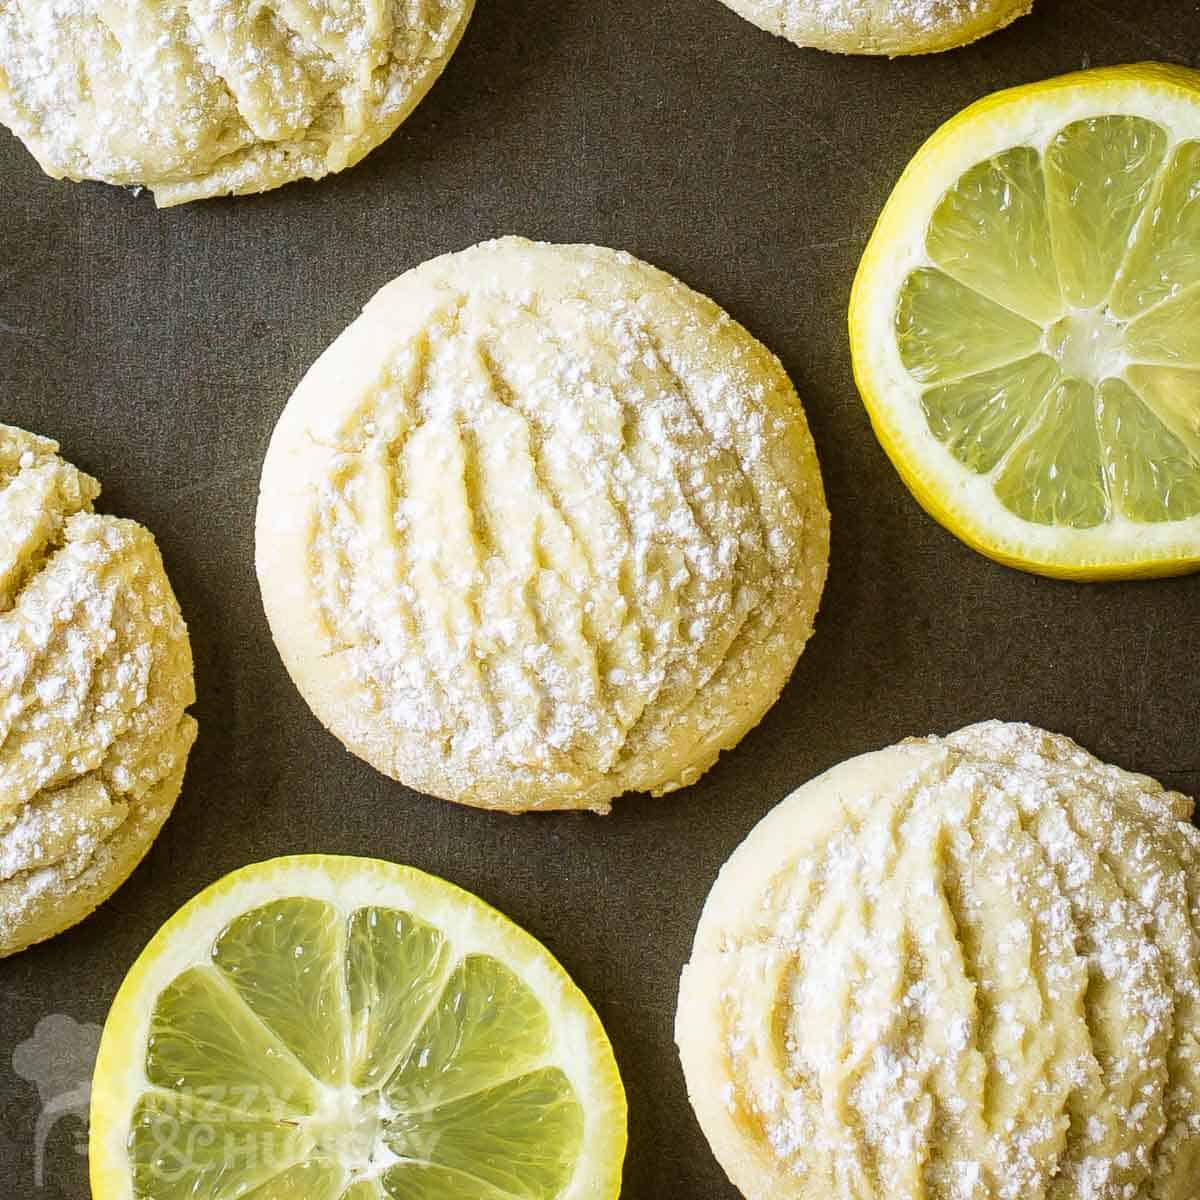 Overhead shot of lemon cookies with powdered sugar on a brown surface with slices of lemons on the side.